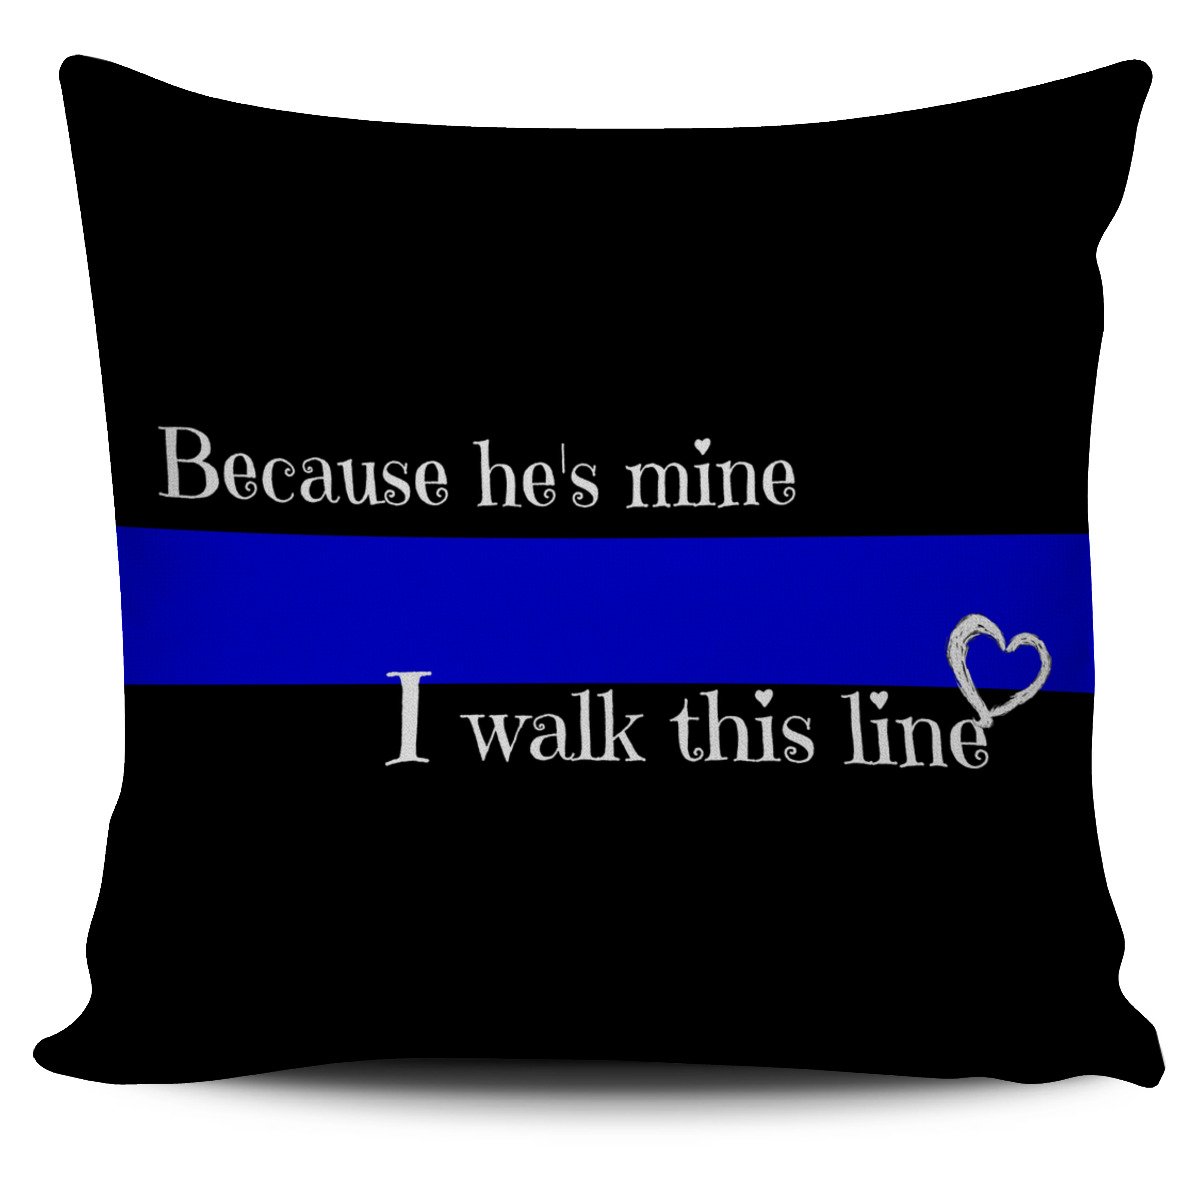 "Because He's Mine" - Thin Blue Line Pillow